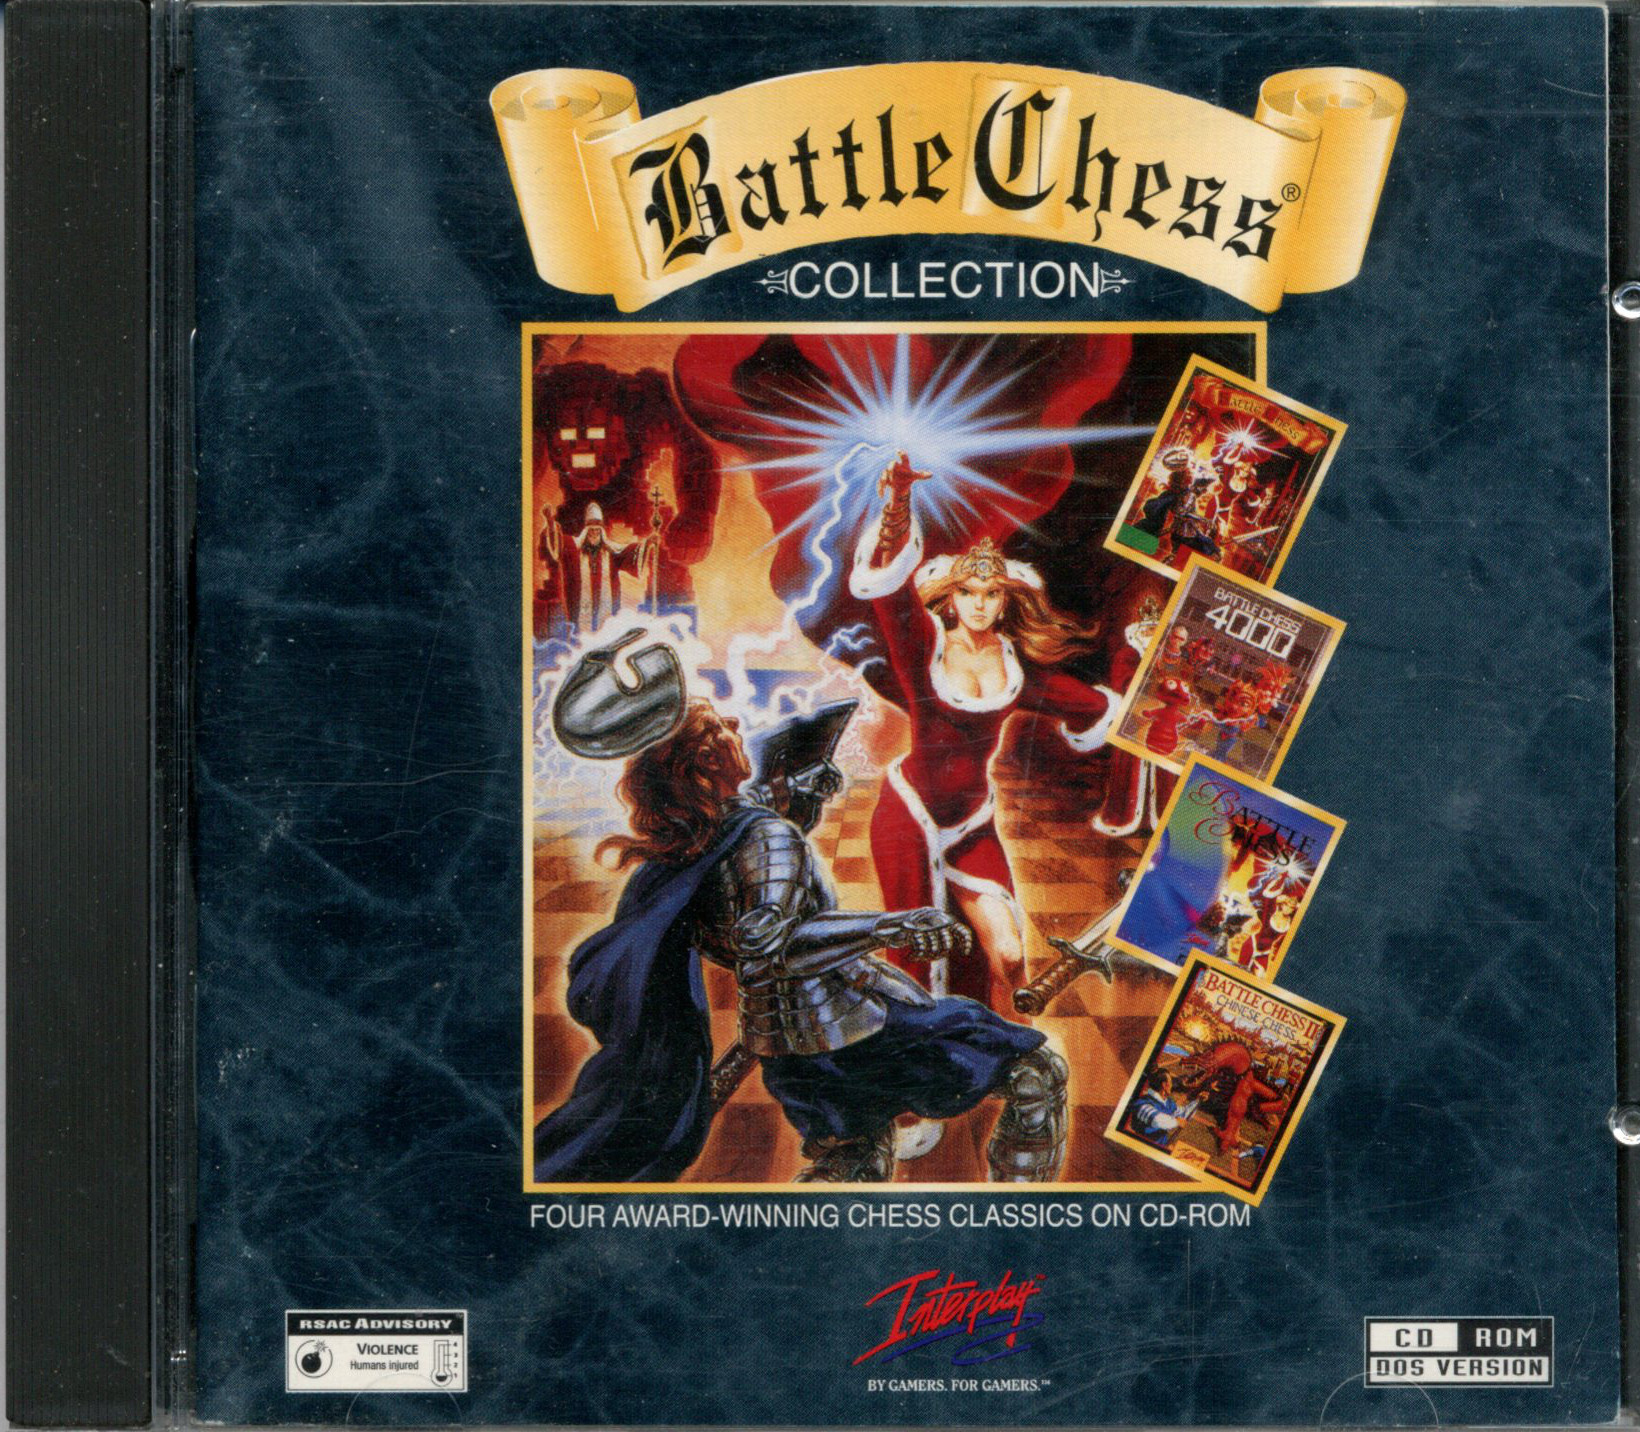 Battle Chess Collection - 4 Animated Chess Game - Interplay - Games - CD